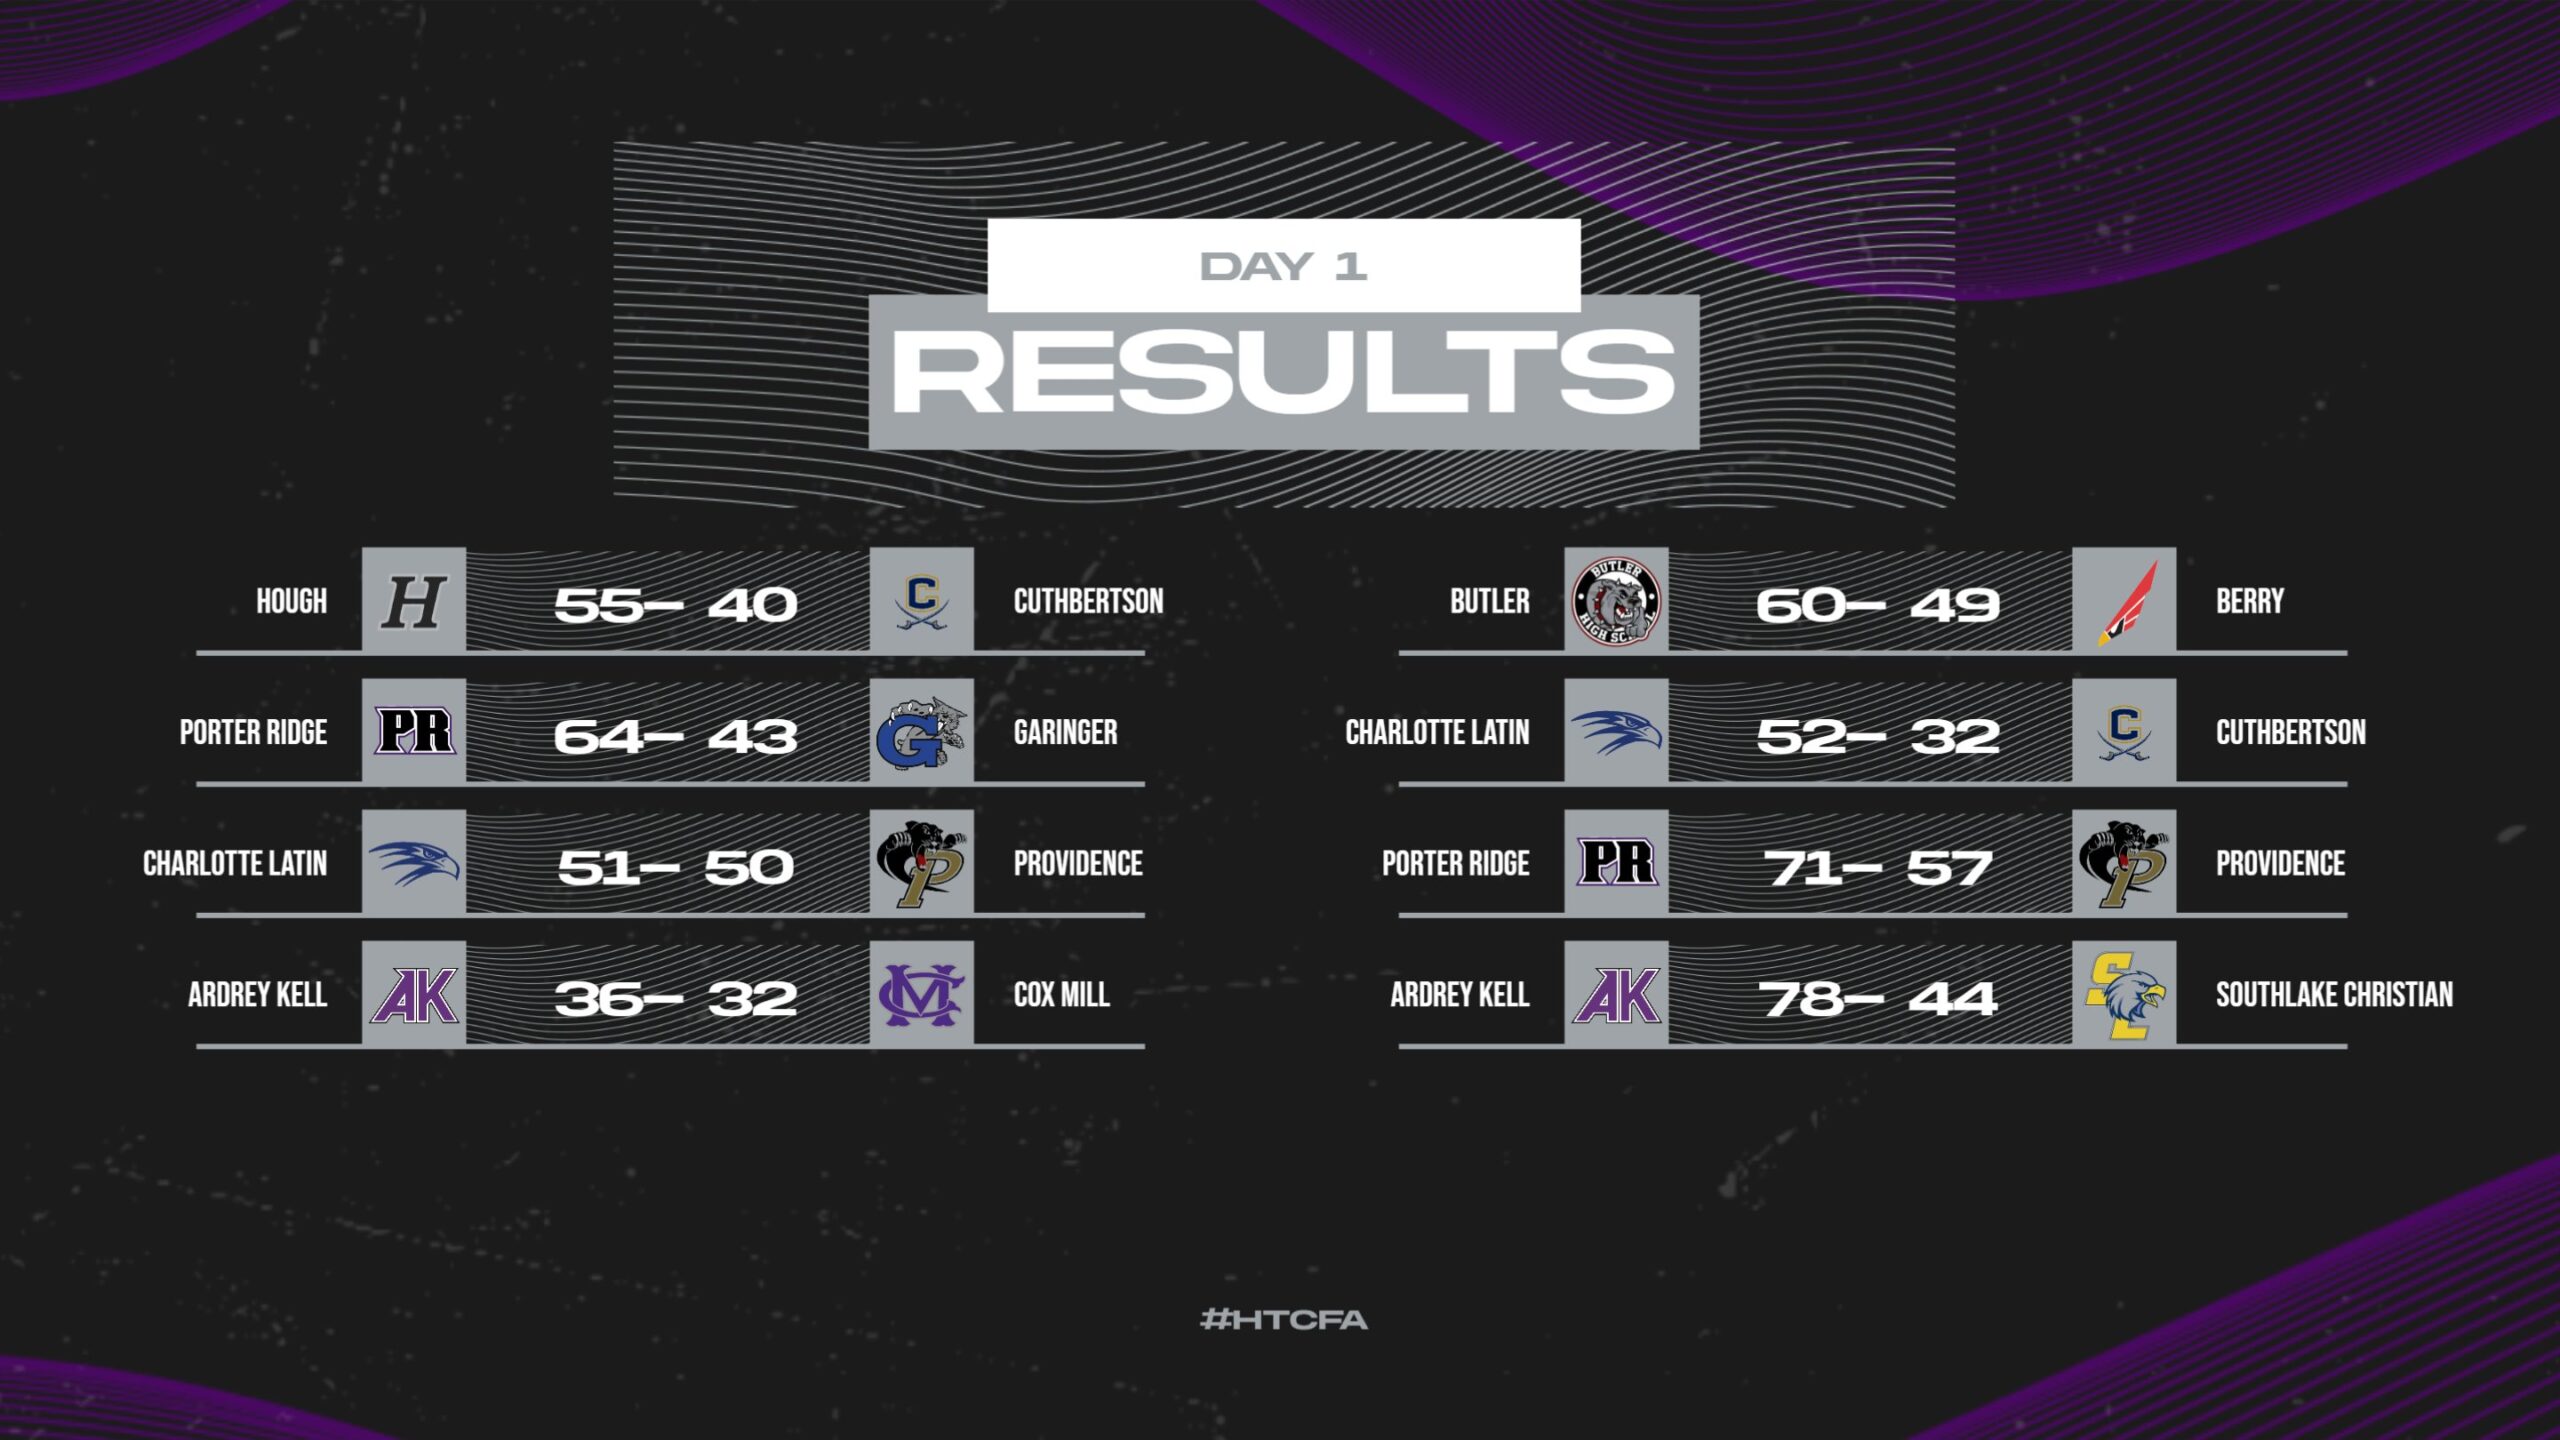 Day 1 Results